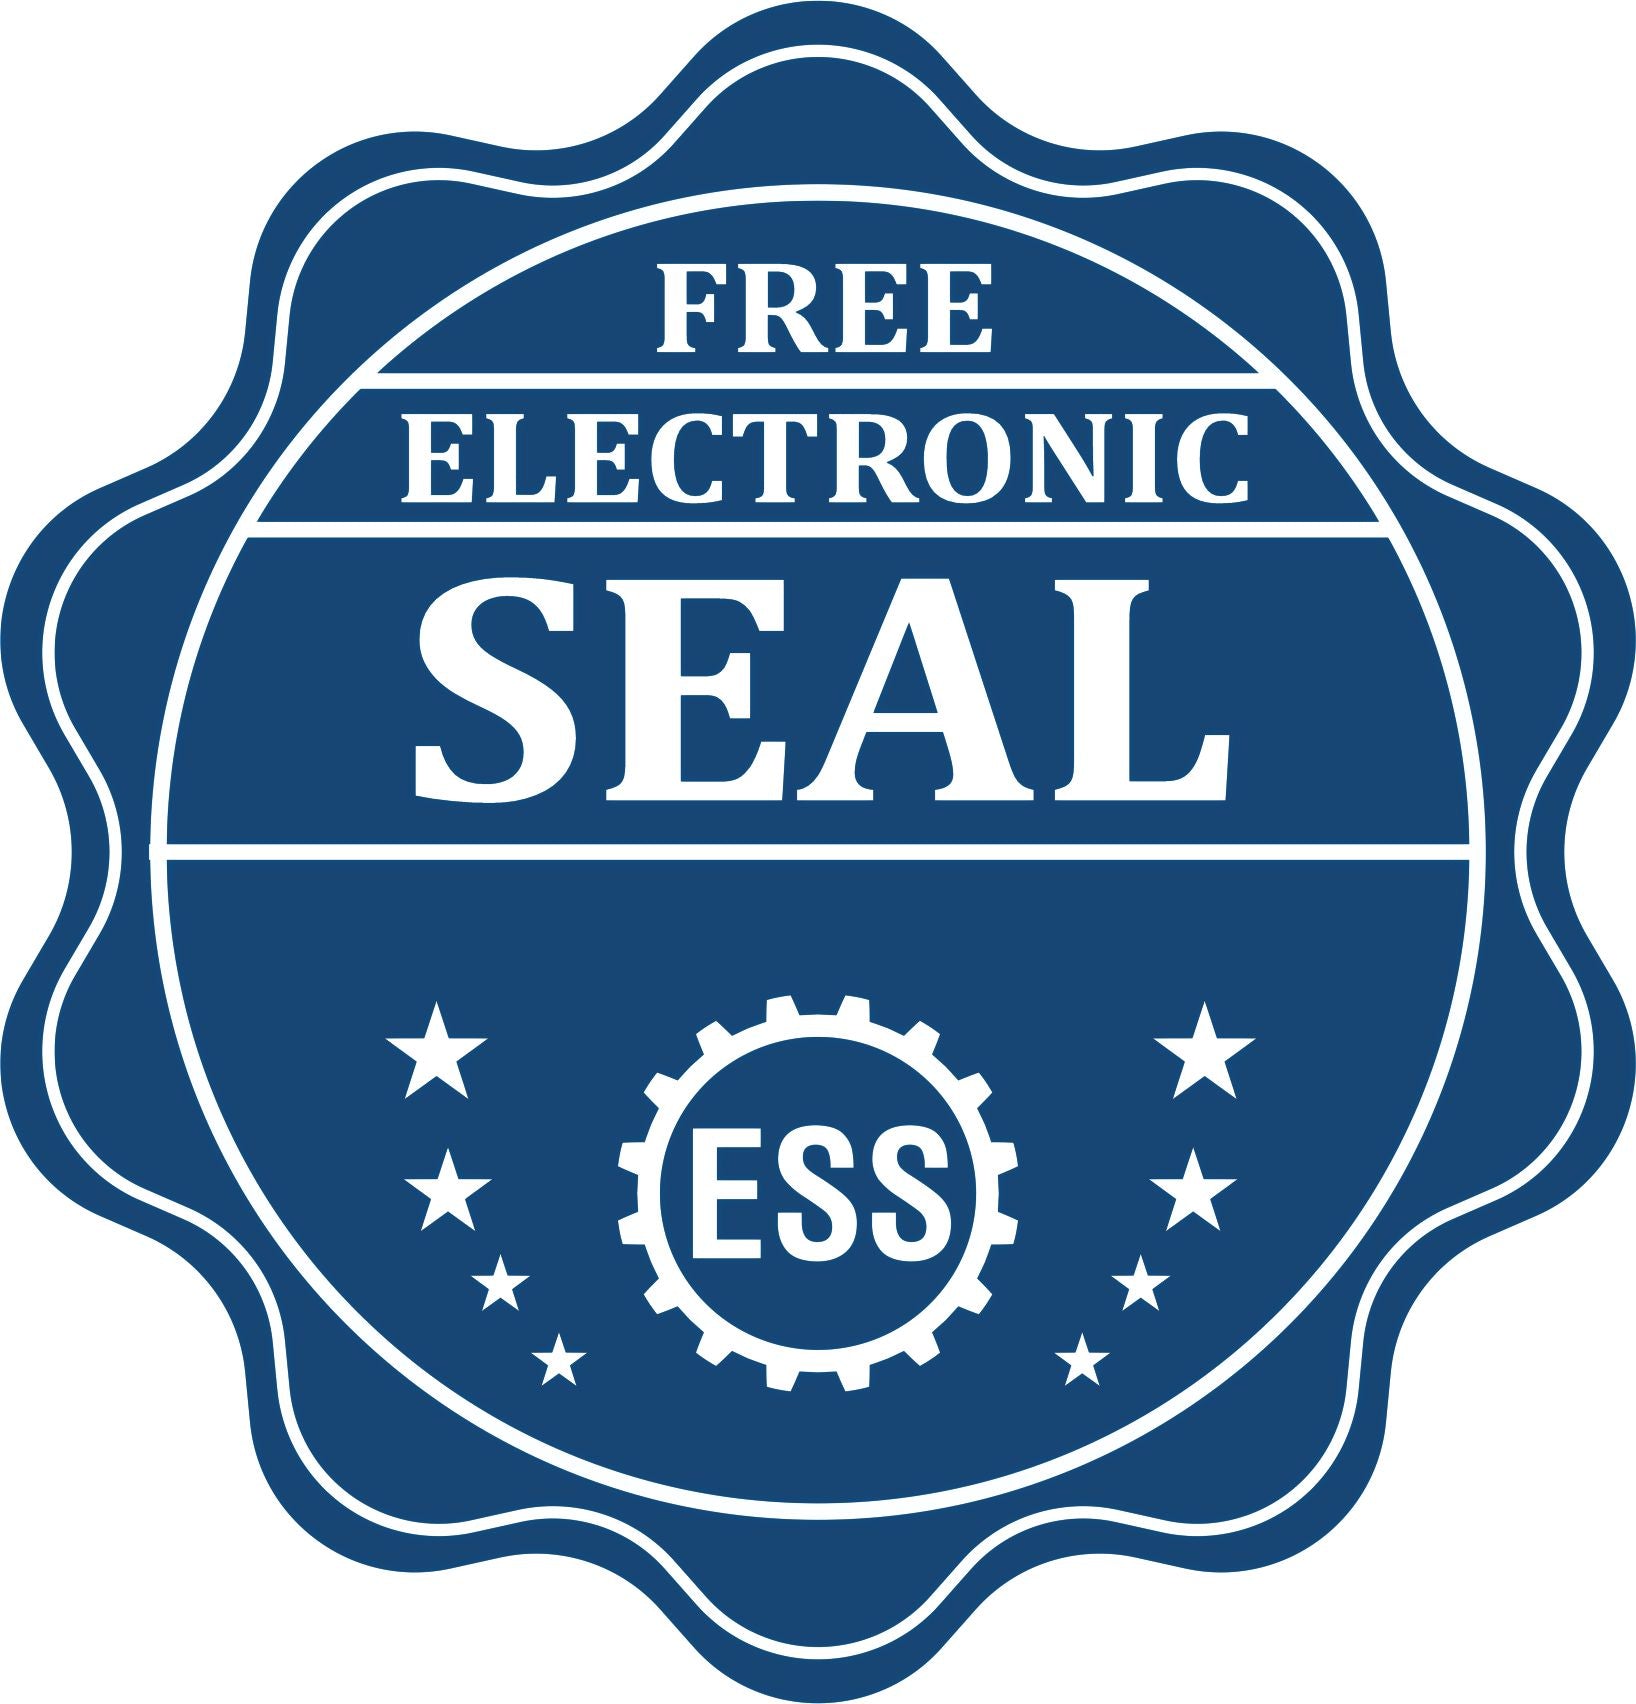 A badge showing a free electronic seal for the Gift Vermont Landscape Architect Seal with stars and the ESS gear on the emblem.